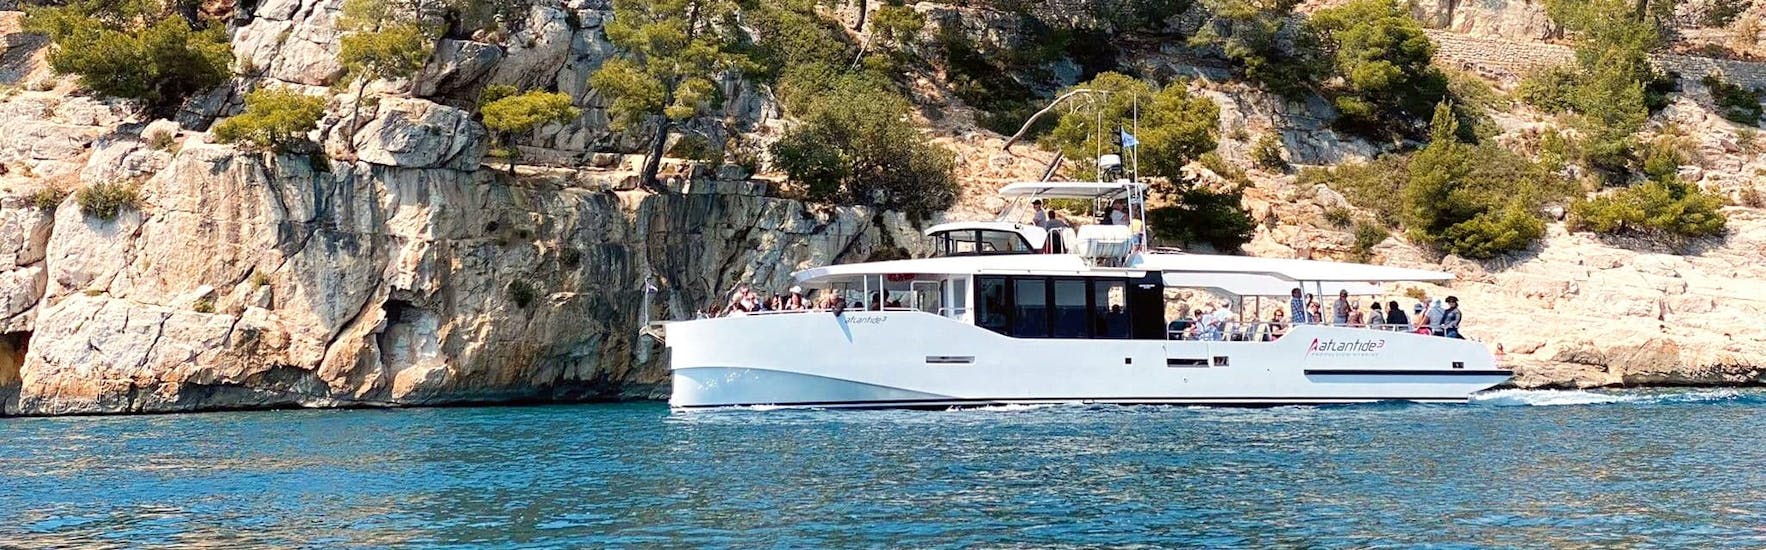 View of the boat going to the Calanques or to Porquerolles with Atlantide Promenades en mer Bandol.